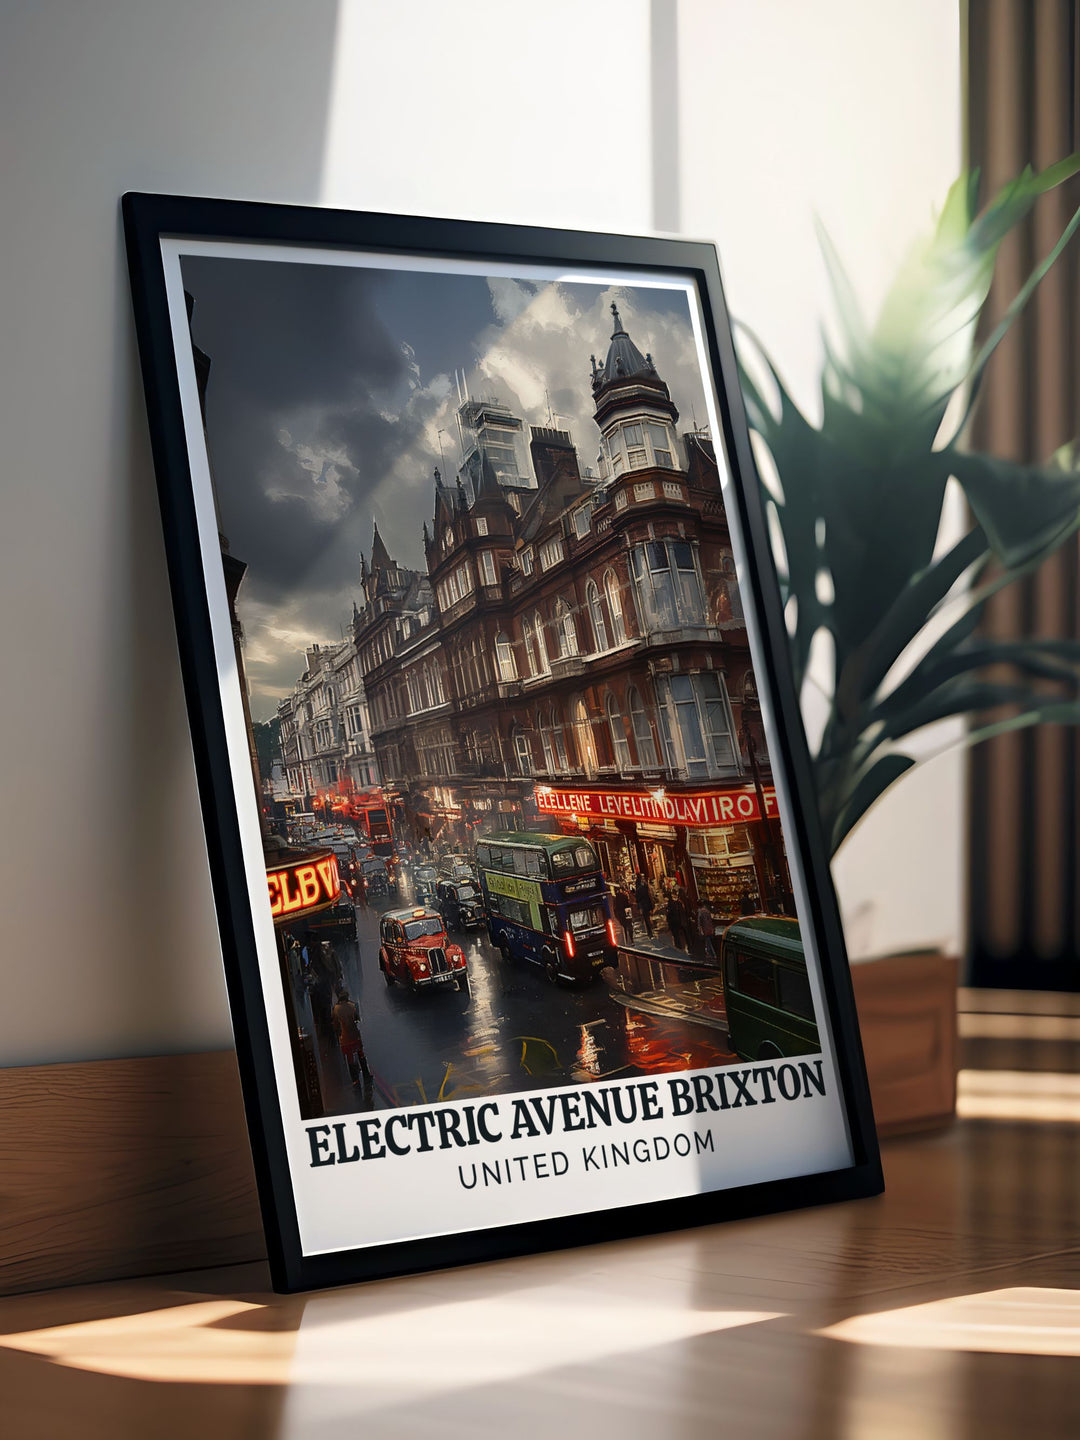 The lively atmosphere of Electric Avenue and its bustling market are beautifully illustrated in this travel poster, capturing the essence of a vibrant London neighborhood.